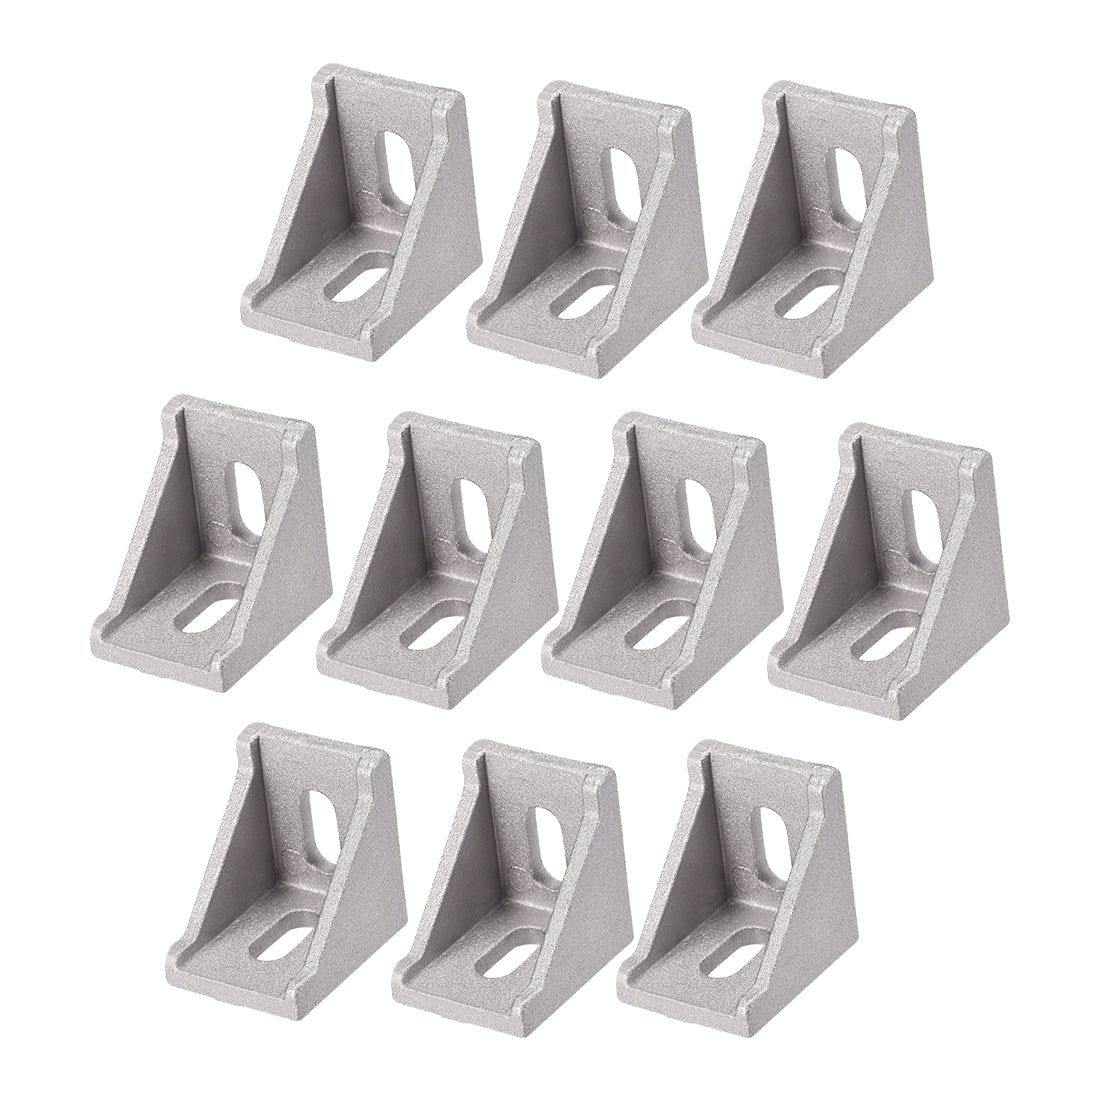 uxcell Uxcell Inside Corner Bracket Gusset, 35mm x 35mm for 3030 Series Aluminum Extrusion Profile with Slot 8mm, 10 Pcs (Silver)